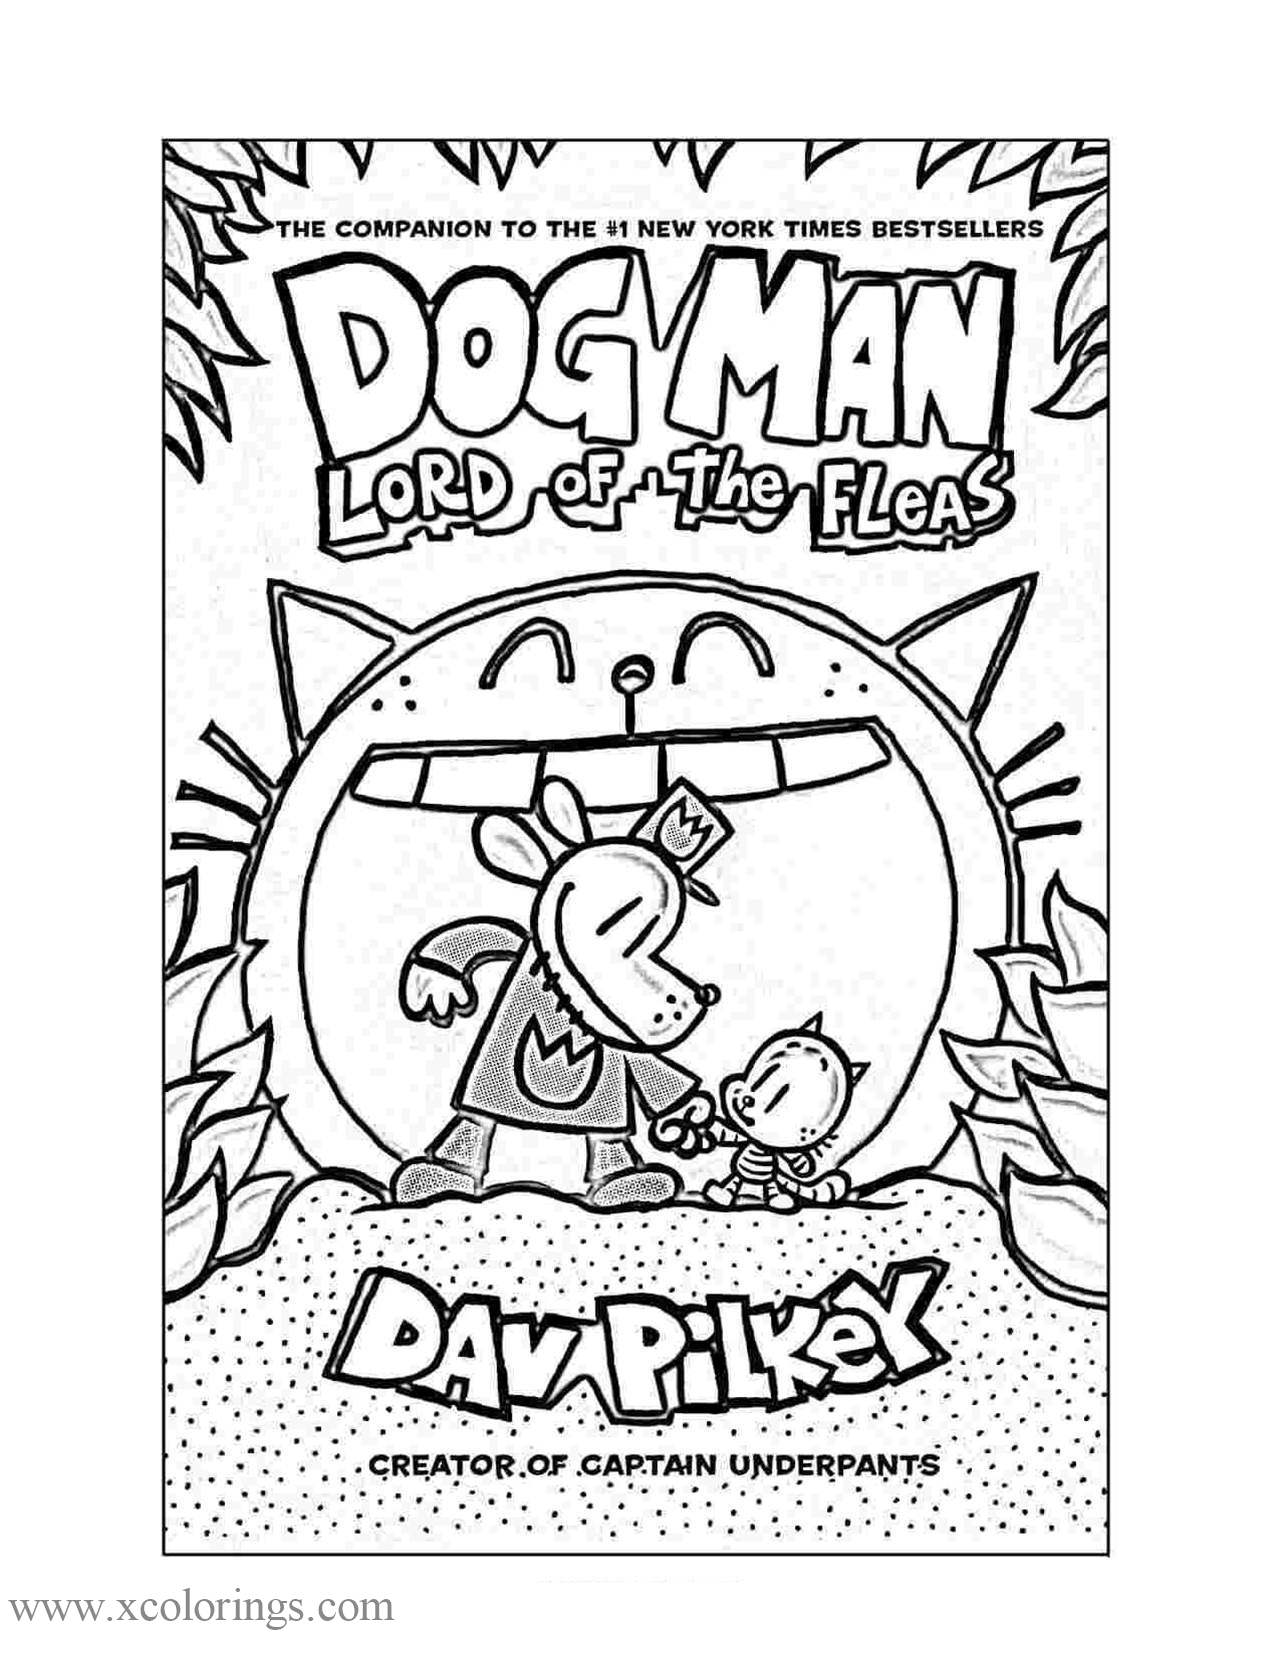 Free Dog Man Lord of the Fleas Coloring Pages printable